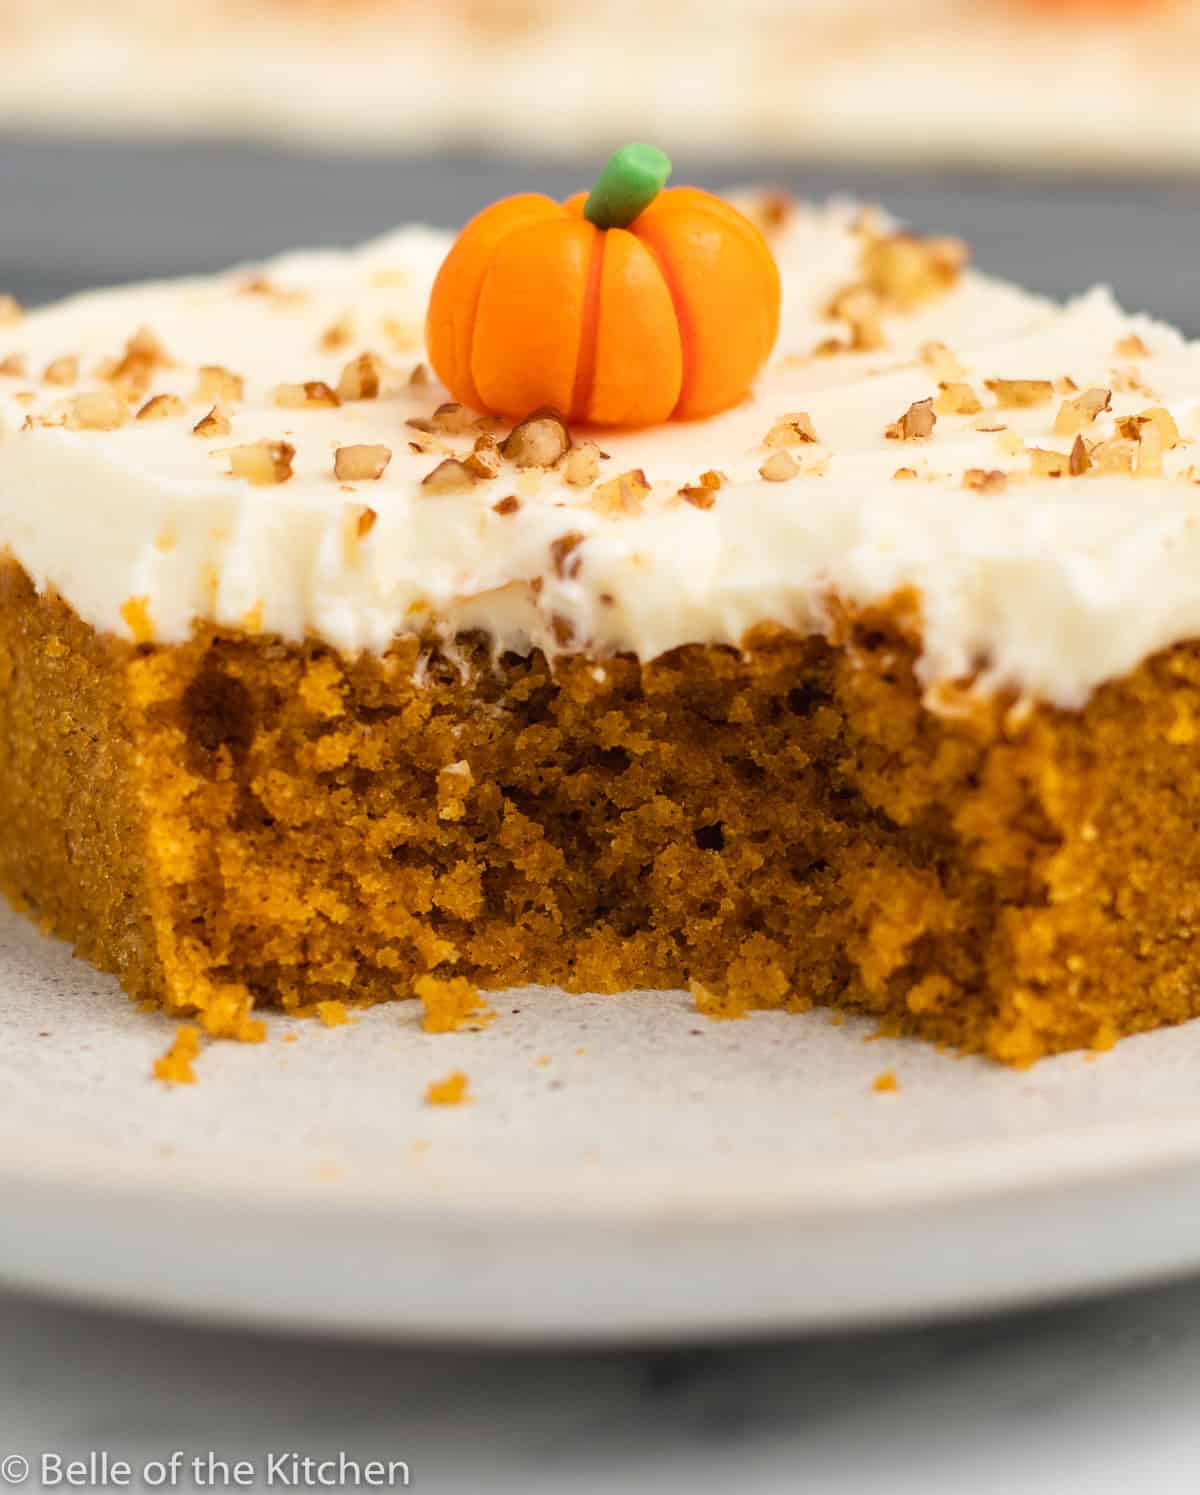 a slice of pumpkin cake on a plate with a bite taken out.